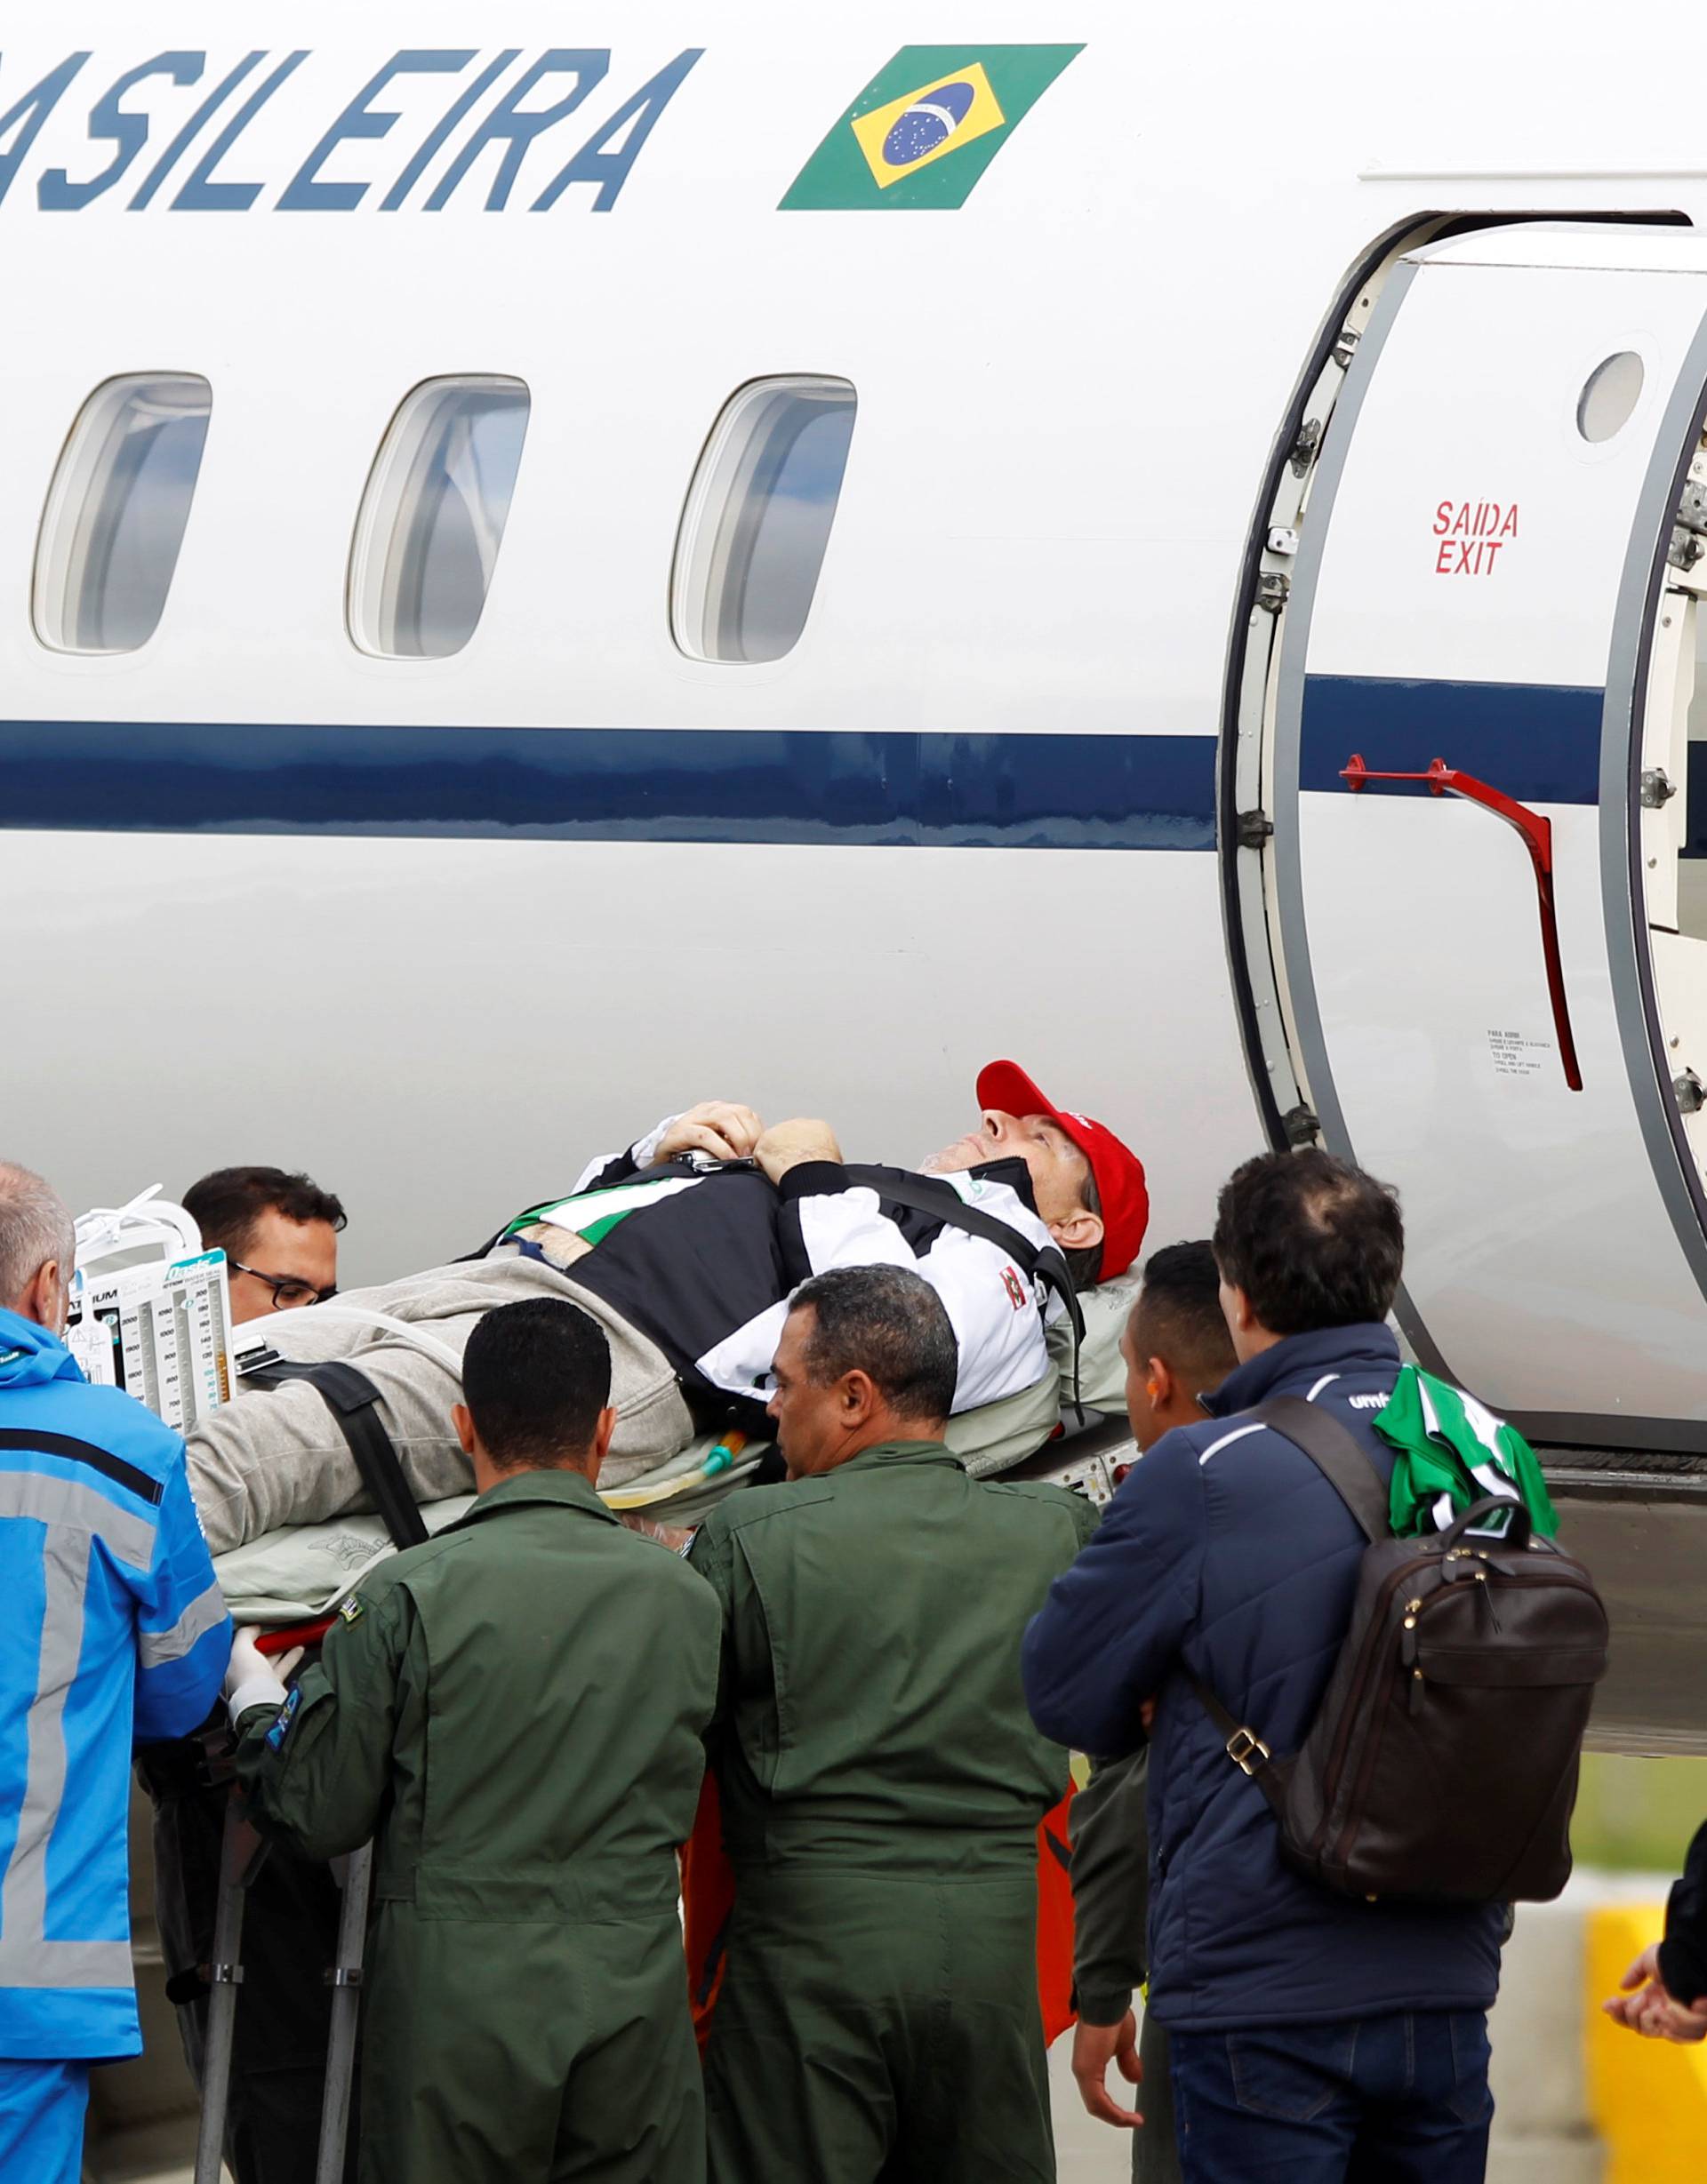 Brazilian radio journalist Rafael Henzel is being loaded into a plane of Brazilian's Air Force for his return to Brazil, after he survived a plane crash with Brazilian soccer team Chapecoense aboard, in Rionegro